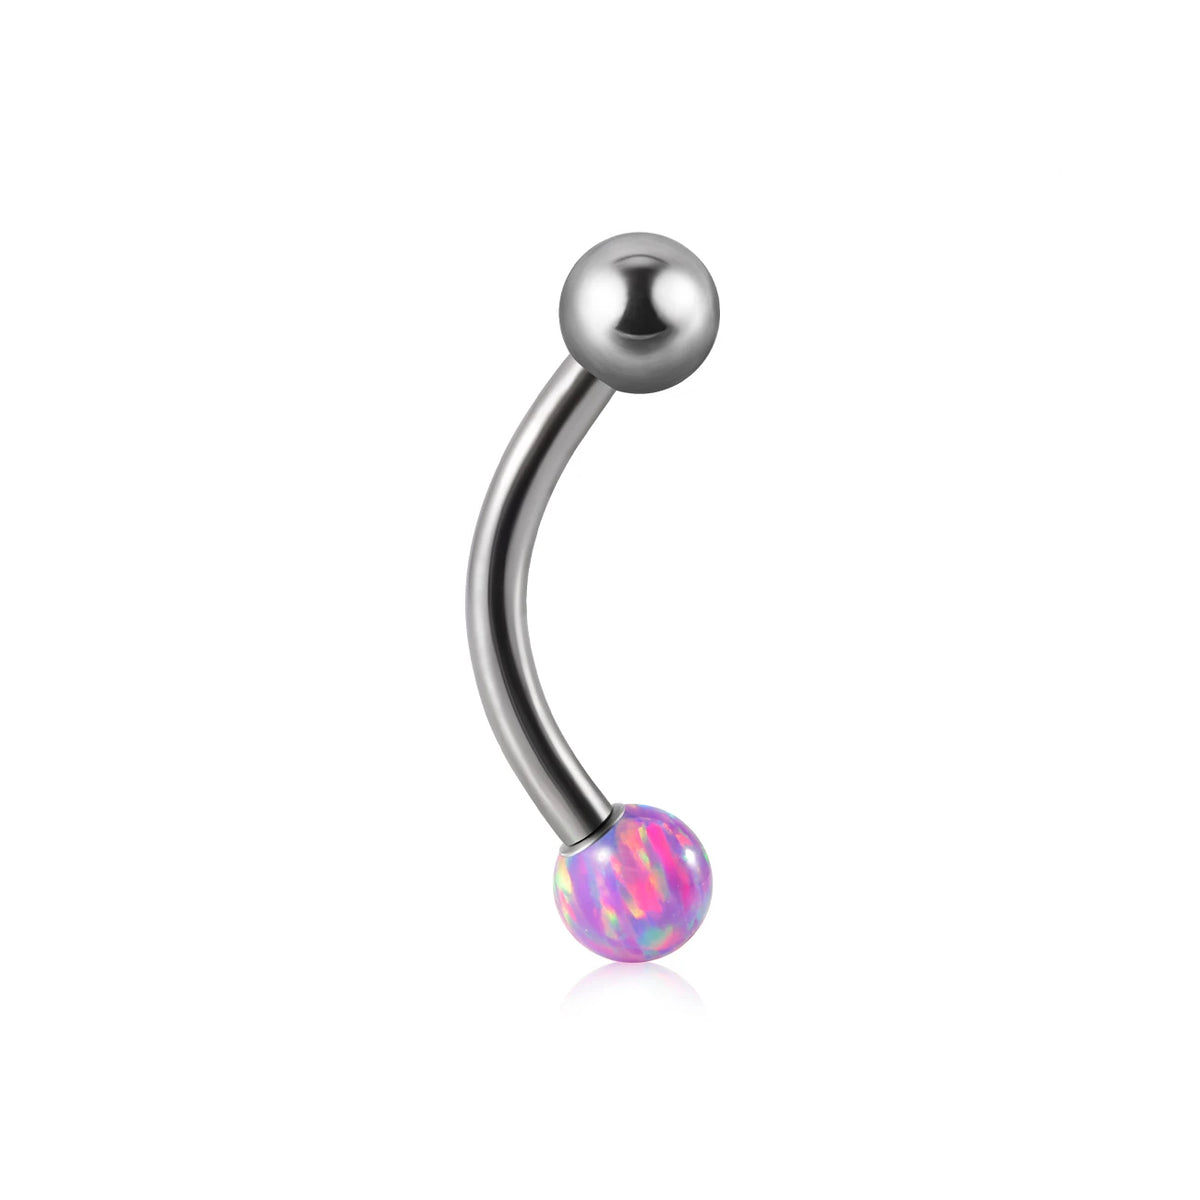 Barbell eyebrow piercing with opal titanium curved barbell